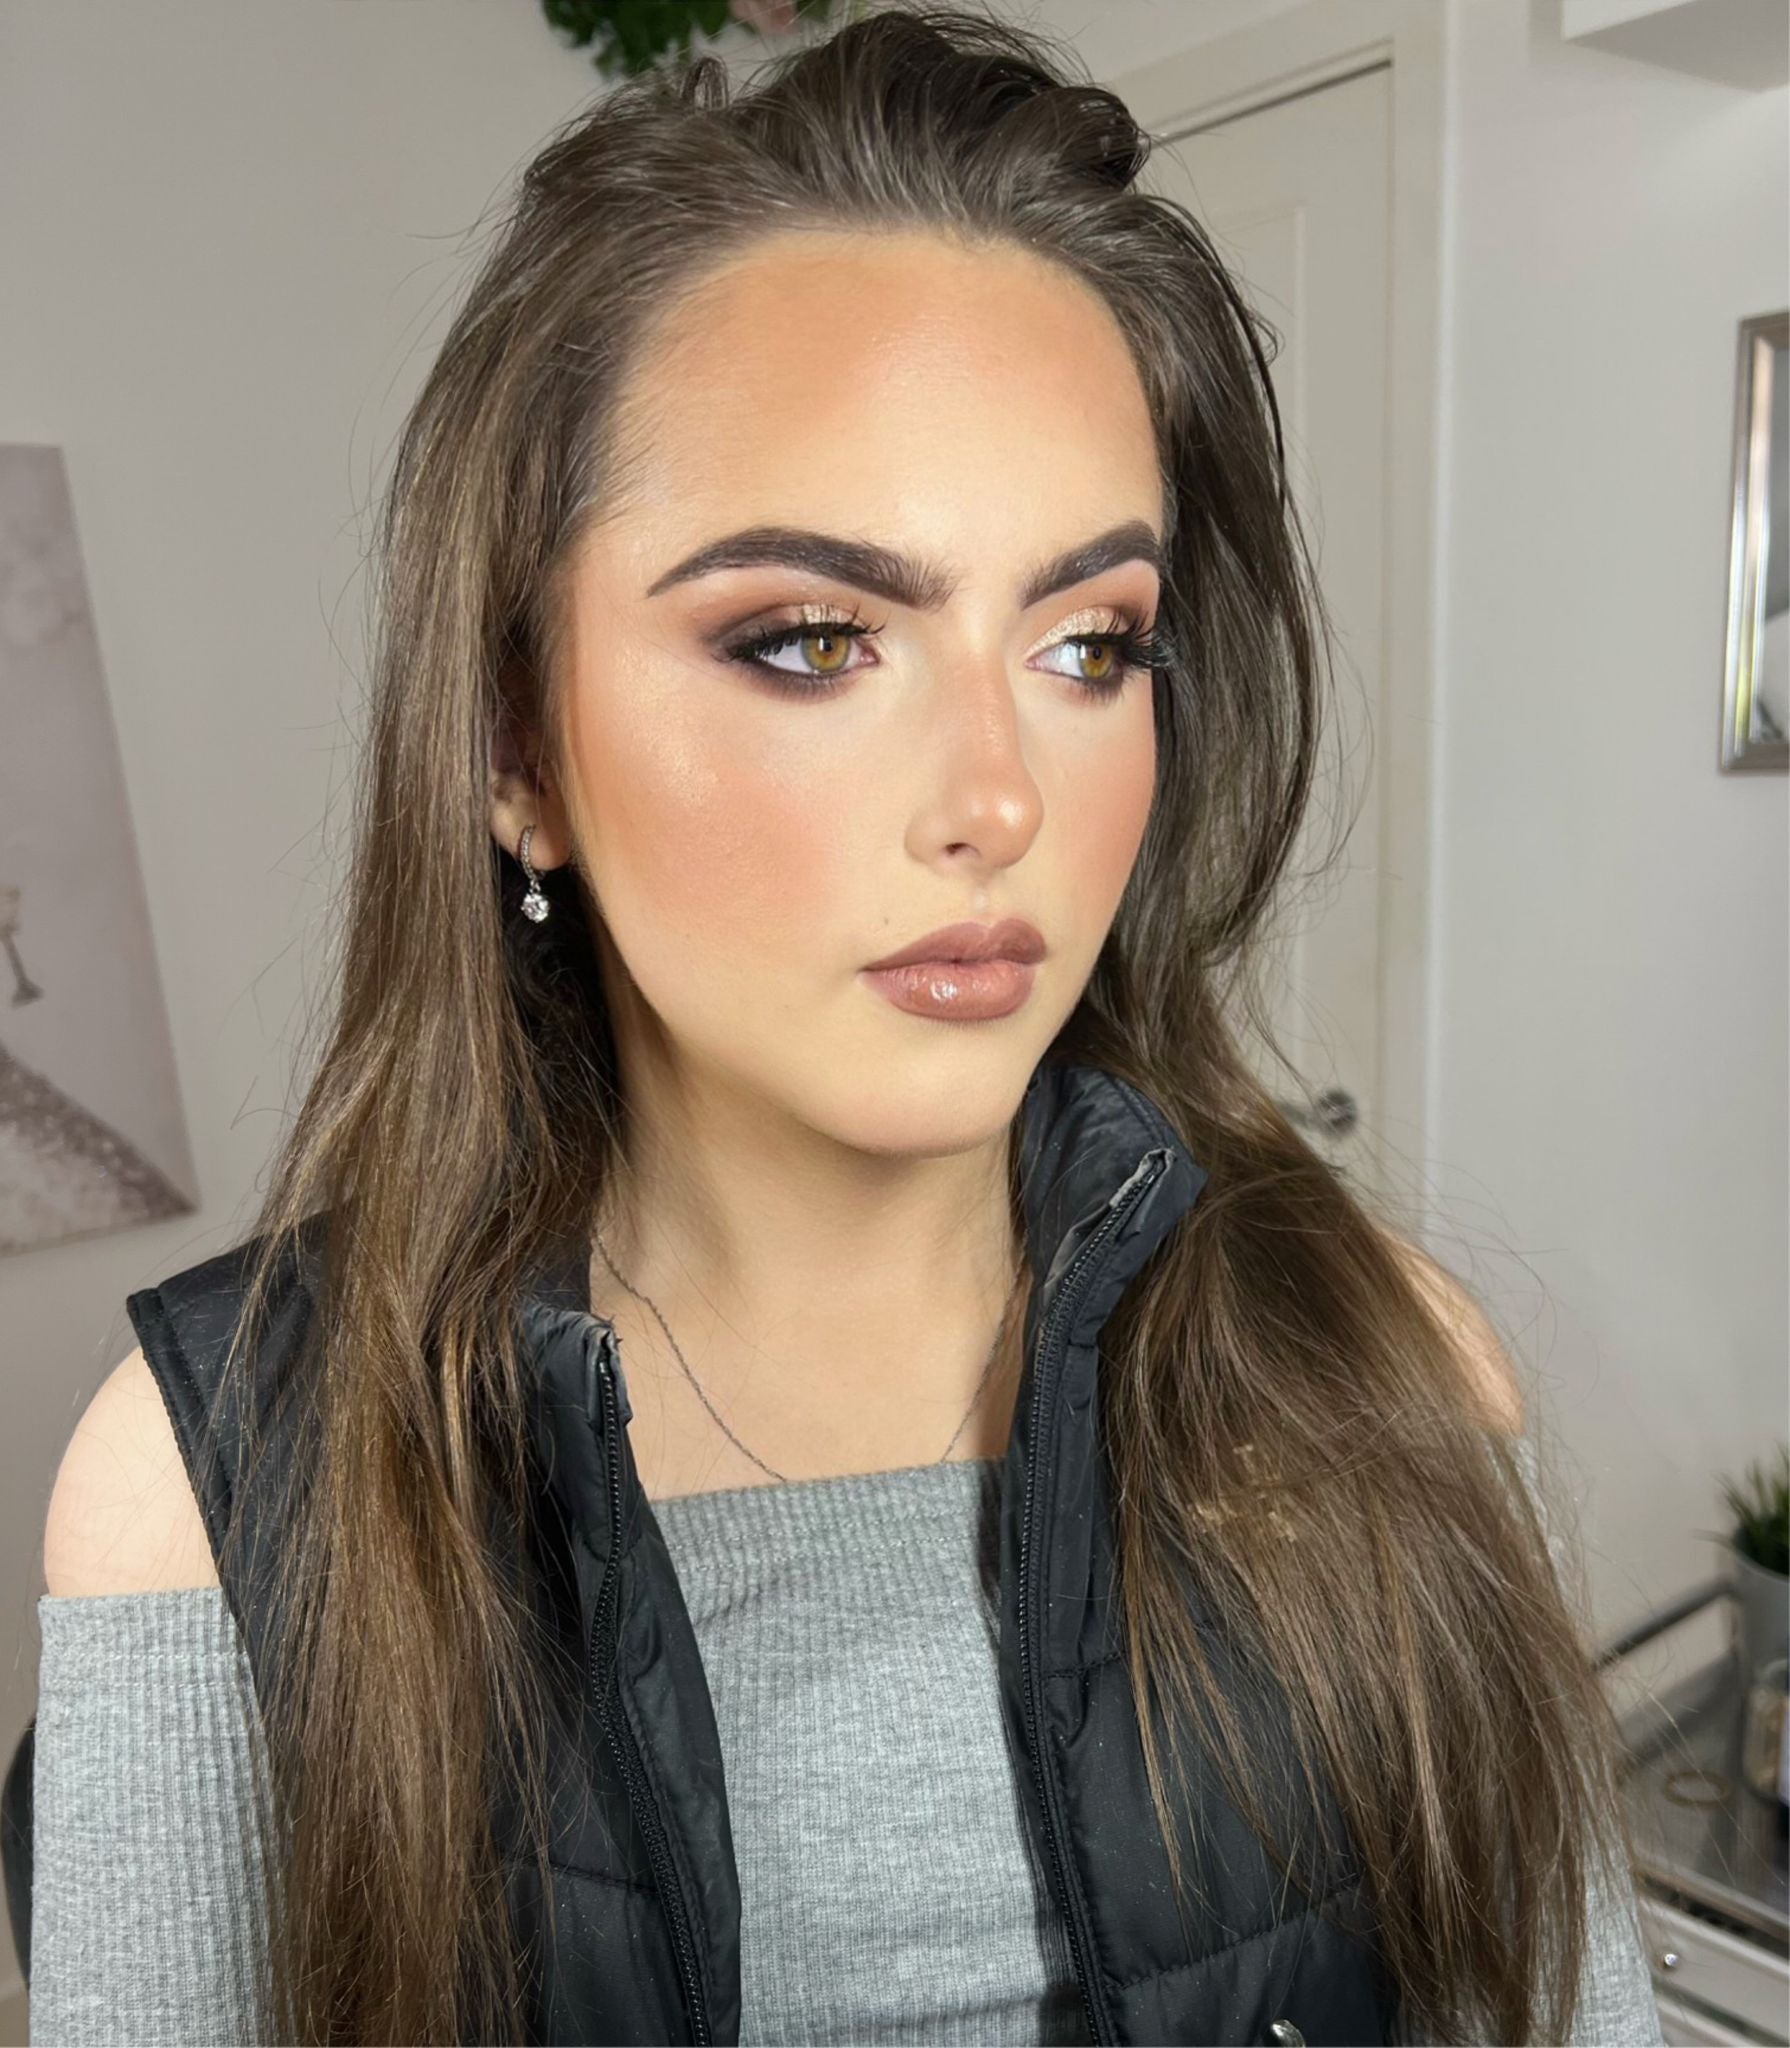 How to do glam makeup